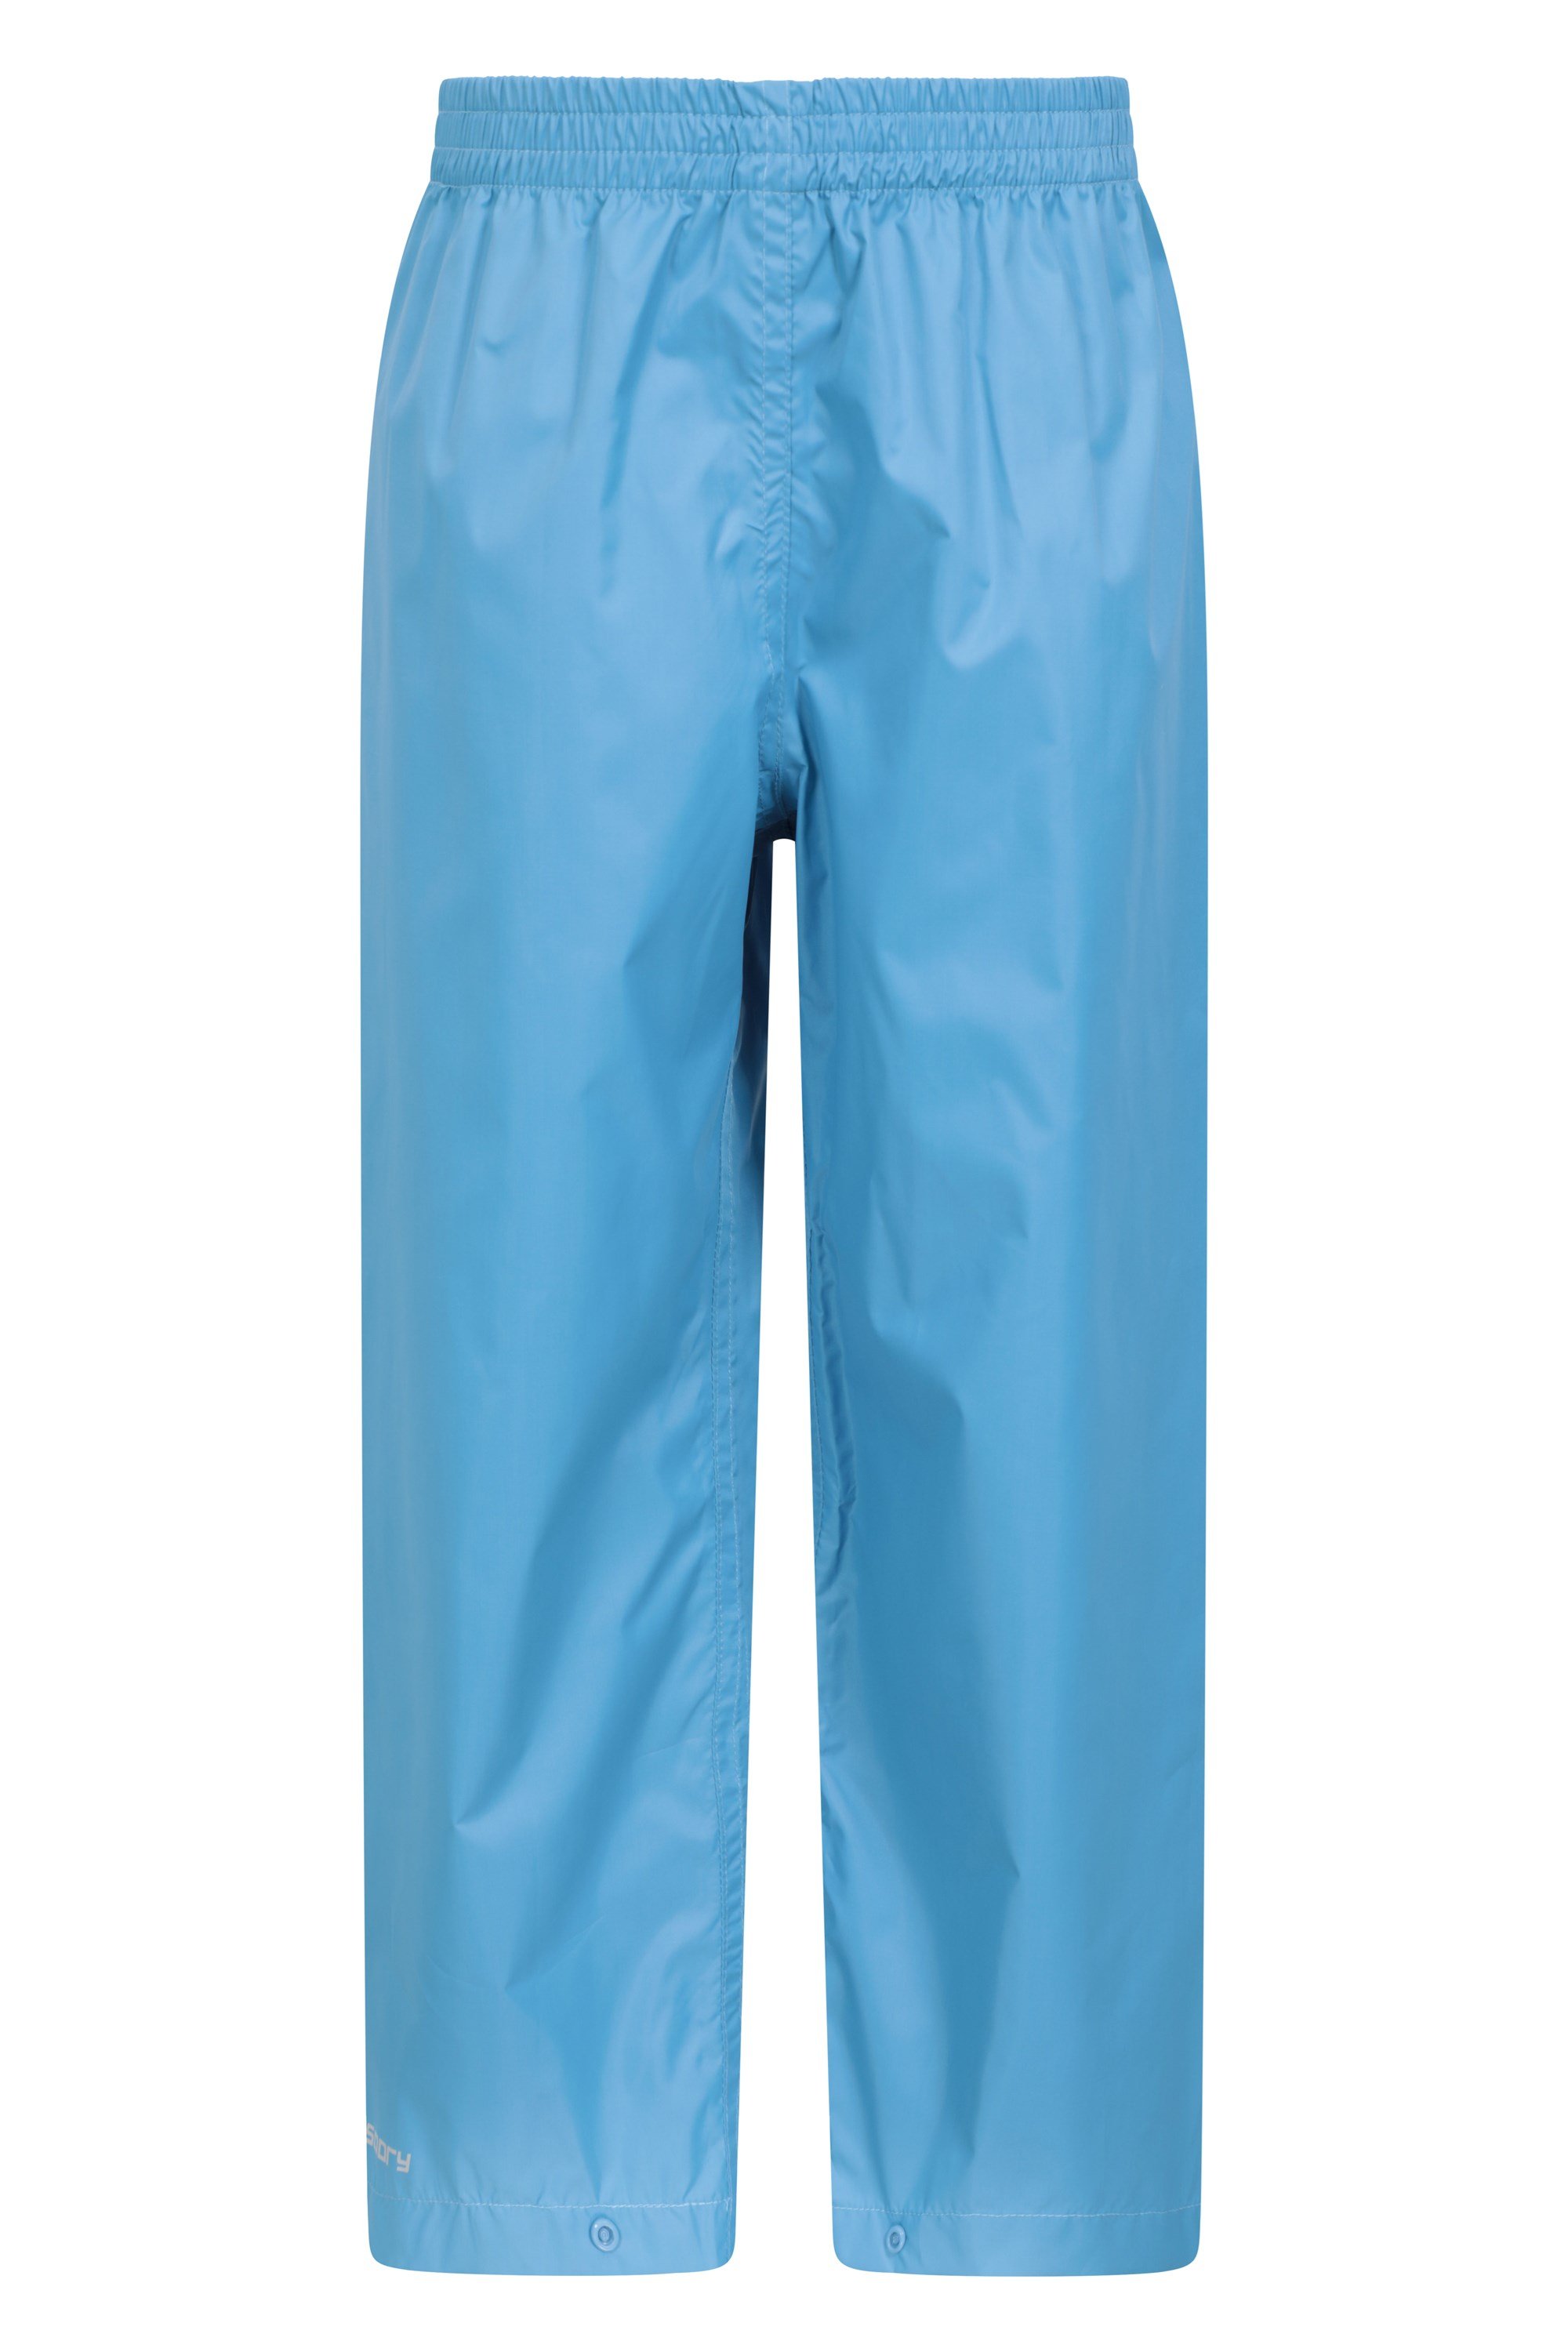 Kids Webbed Feet Overtrousers